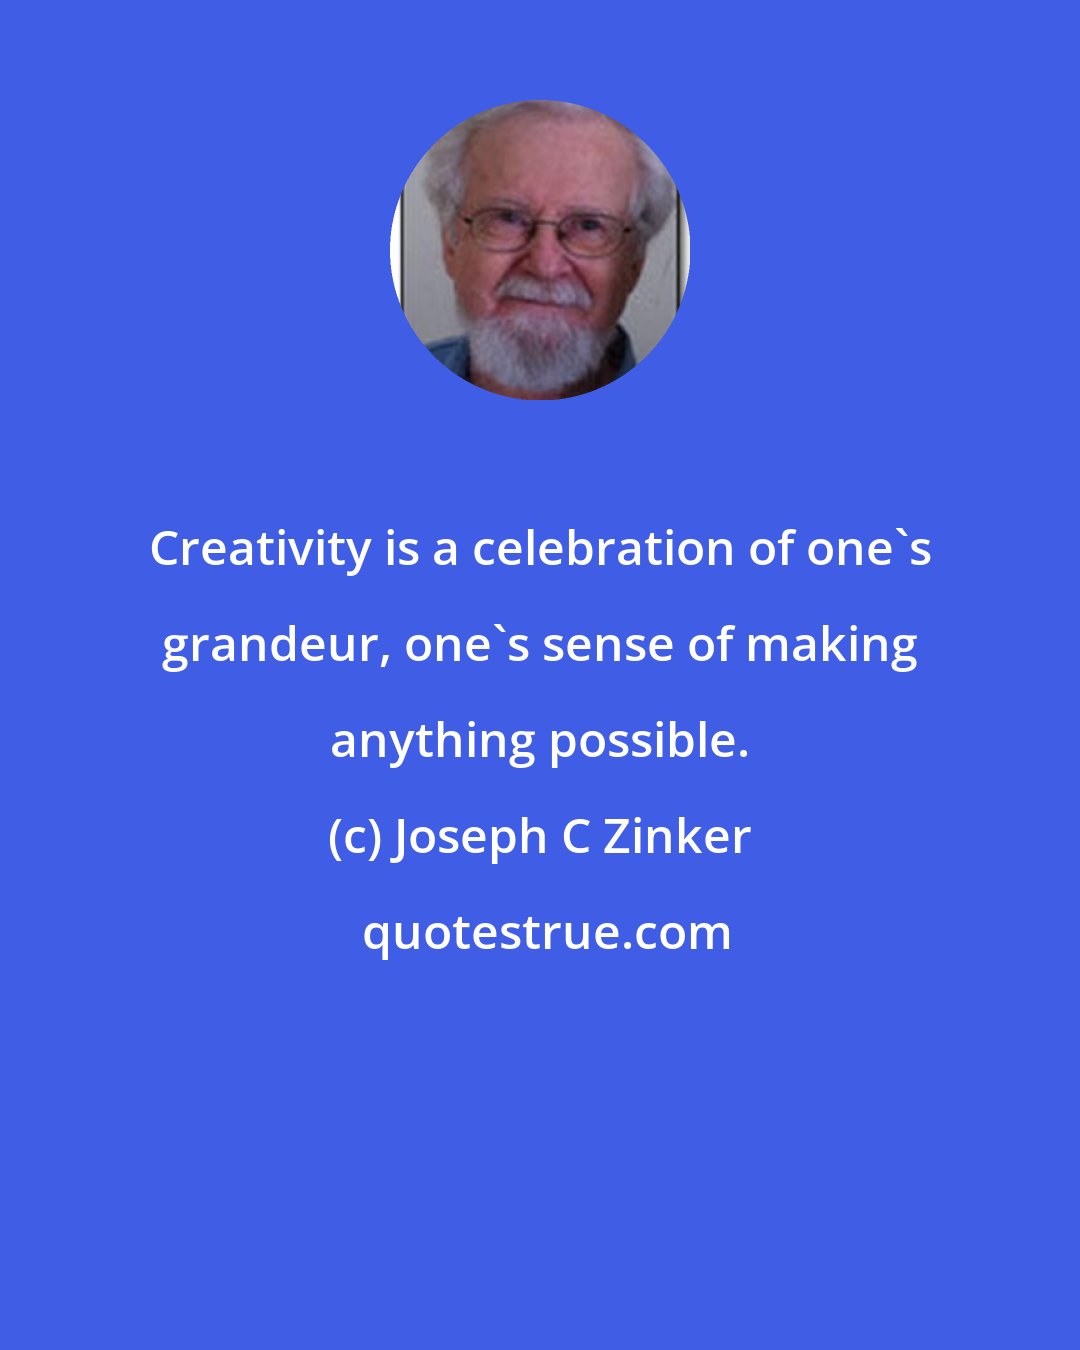 Joseph C Zinker: Creativity is a celebration of one's grandeur, one's sense of making anything possible.